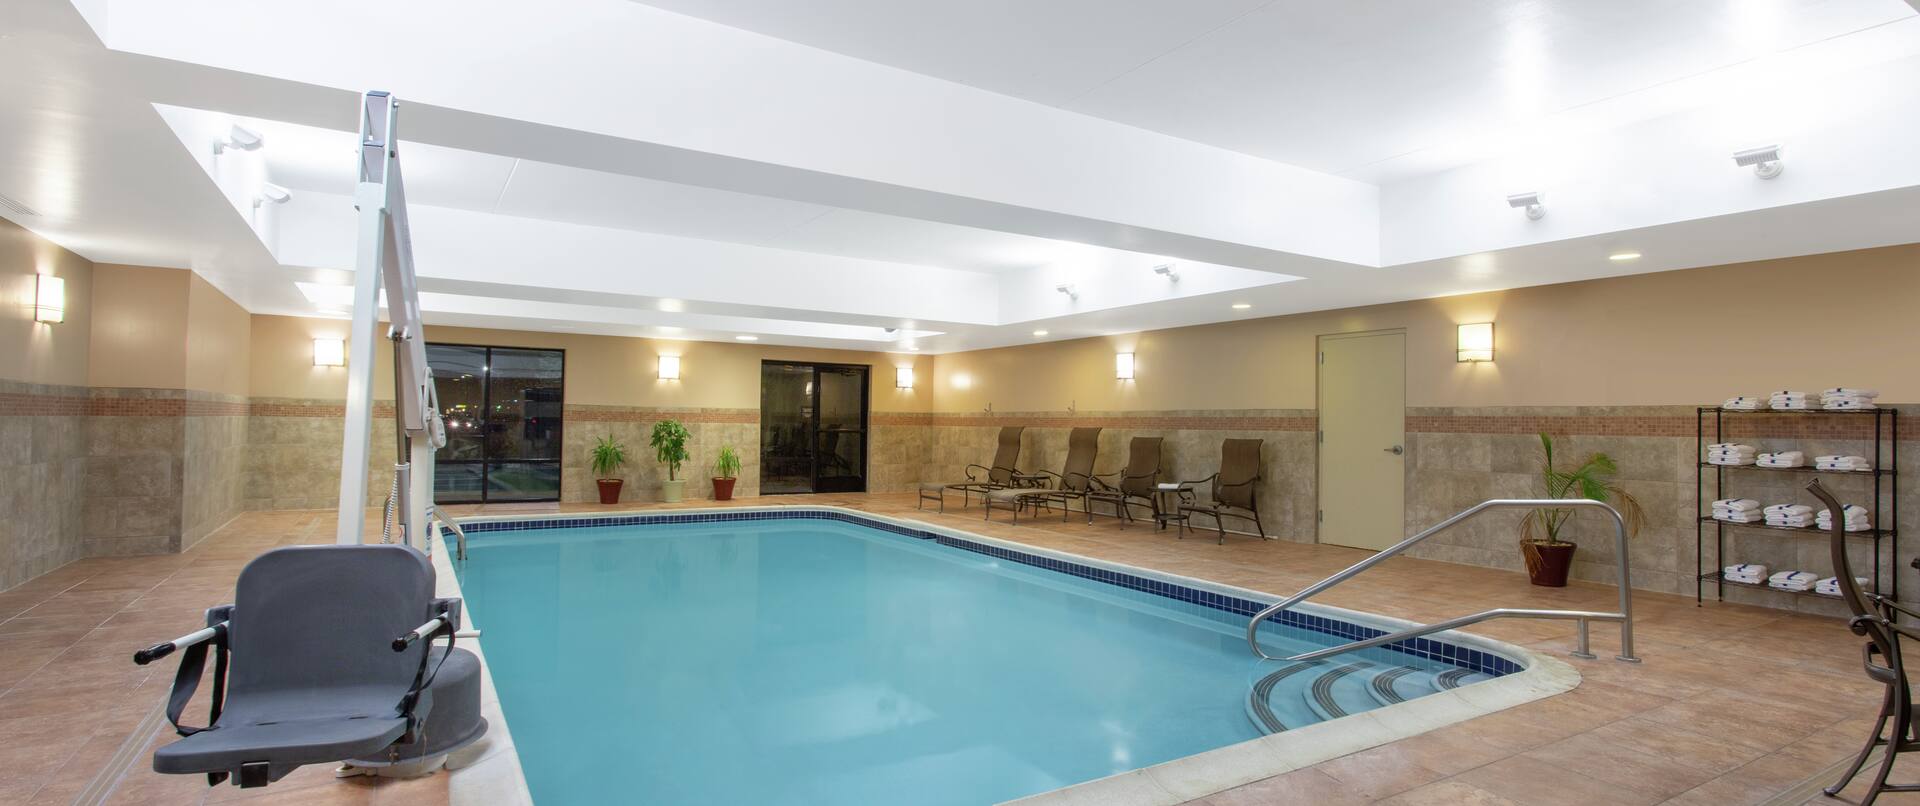 Indoor Pool With Accessible Chair Lift